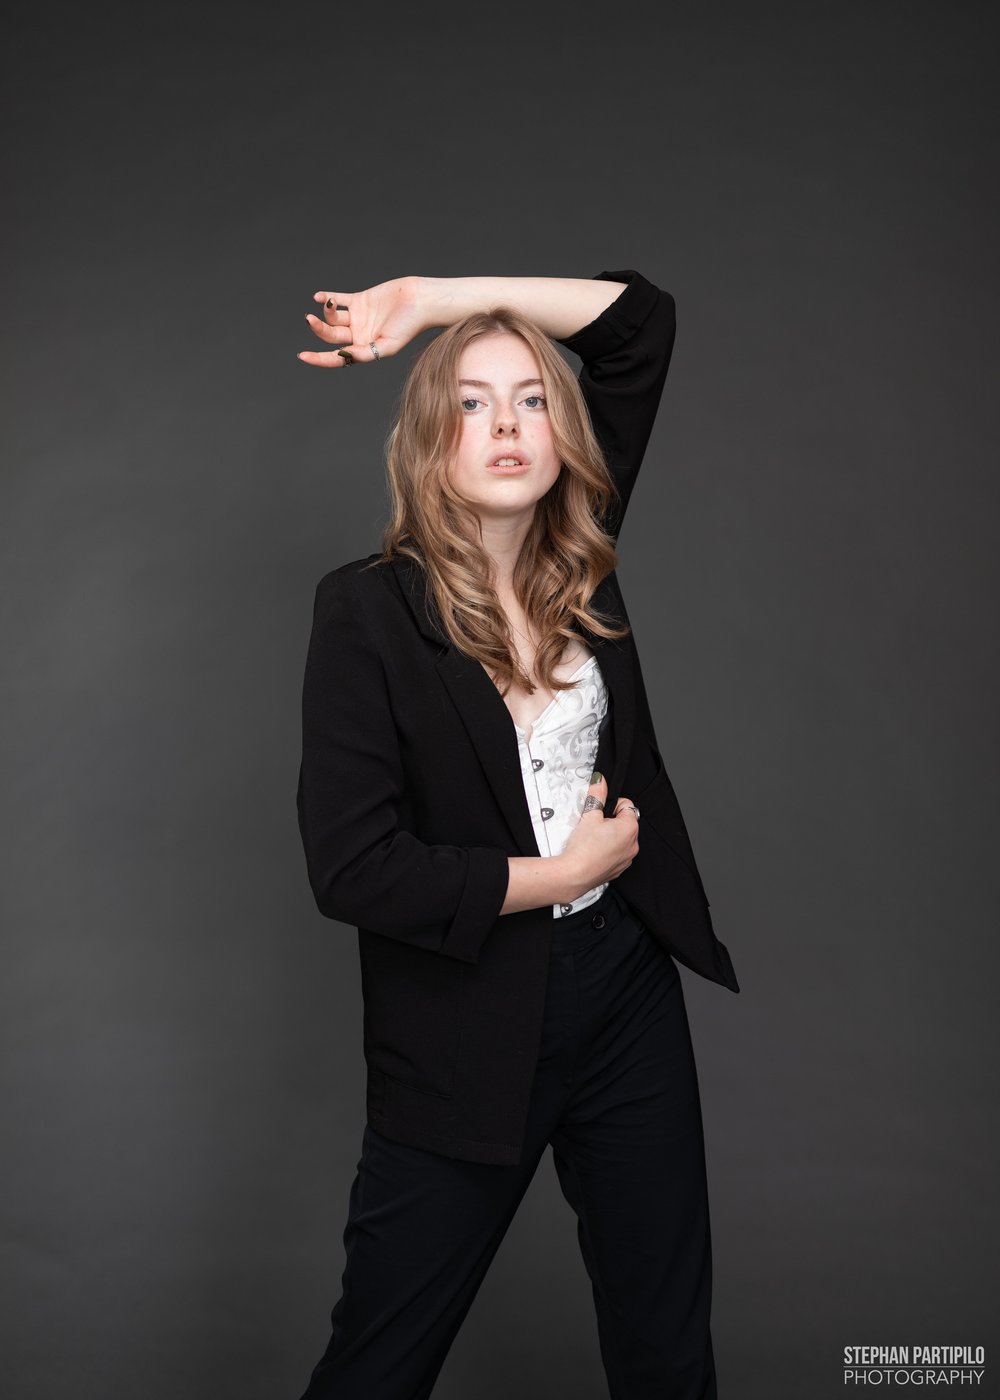 Lydia x Studio Session With Black Fancy Formal Outfit and Grey Background 0G5A4815 copy.jpg